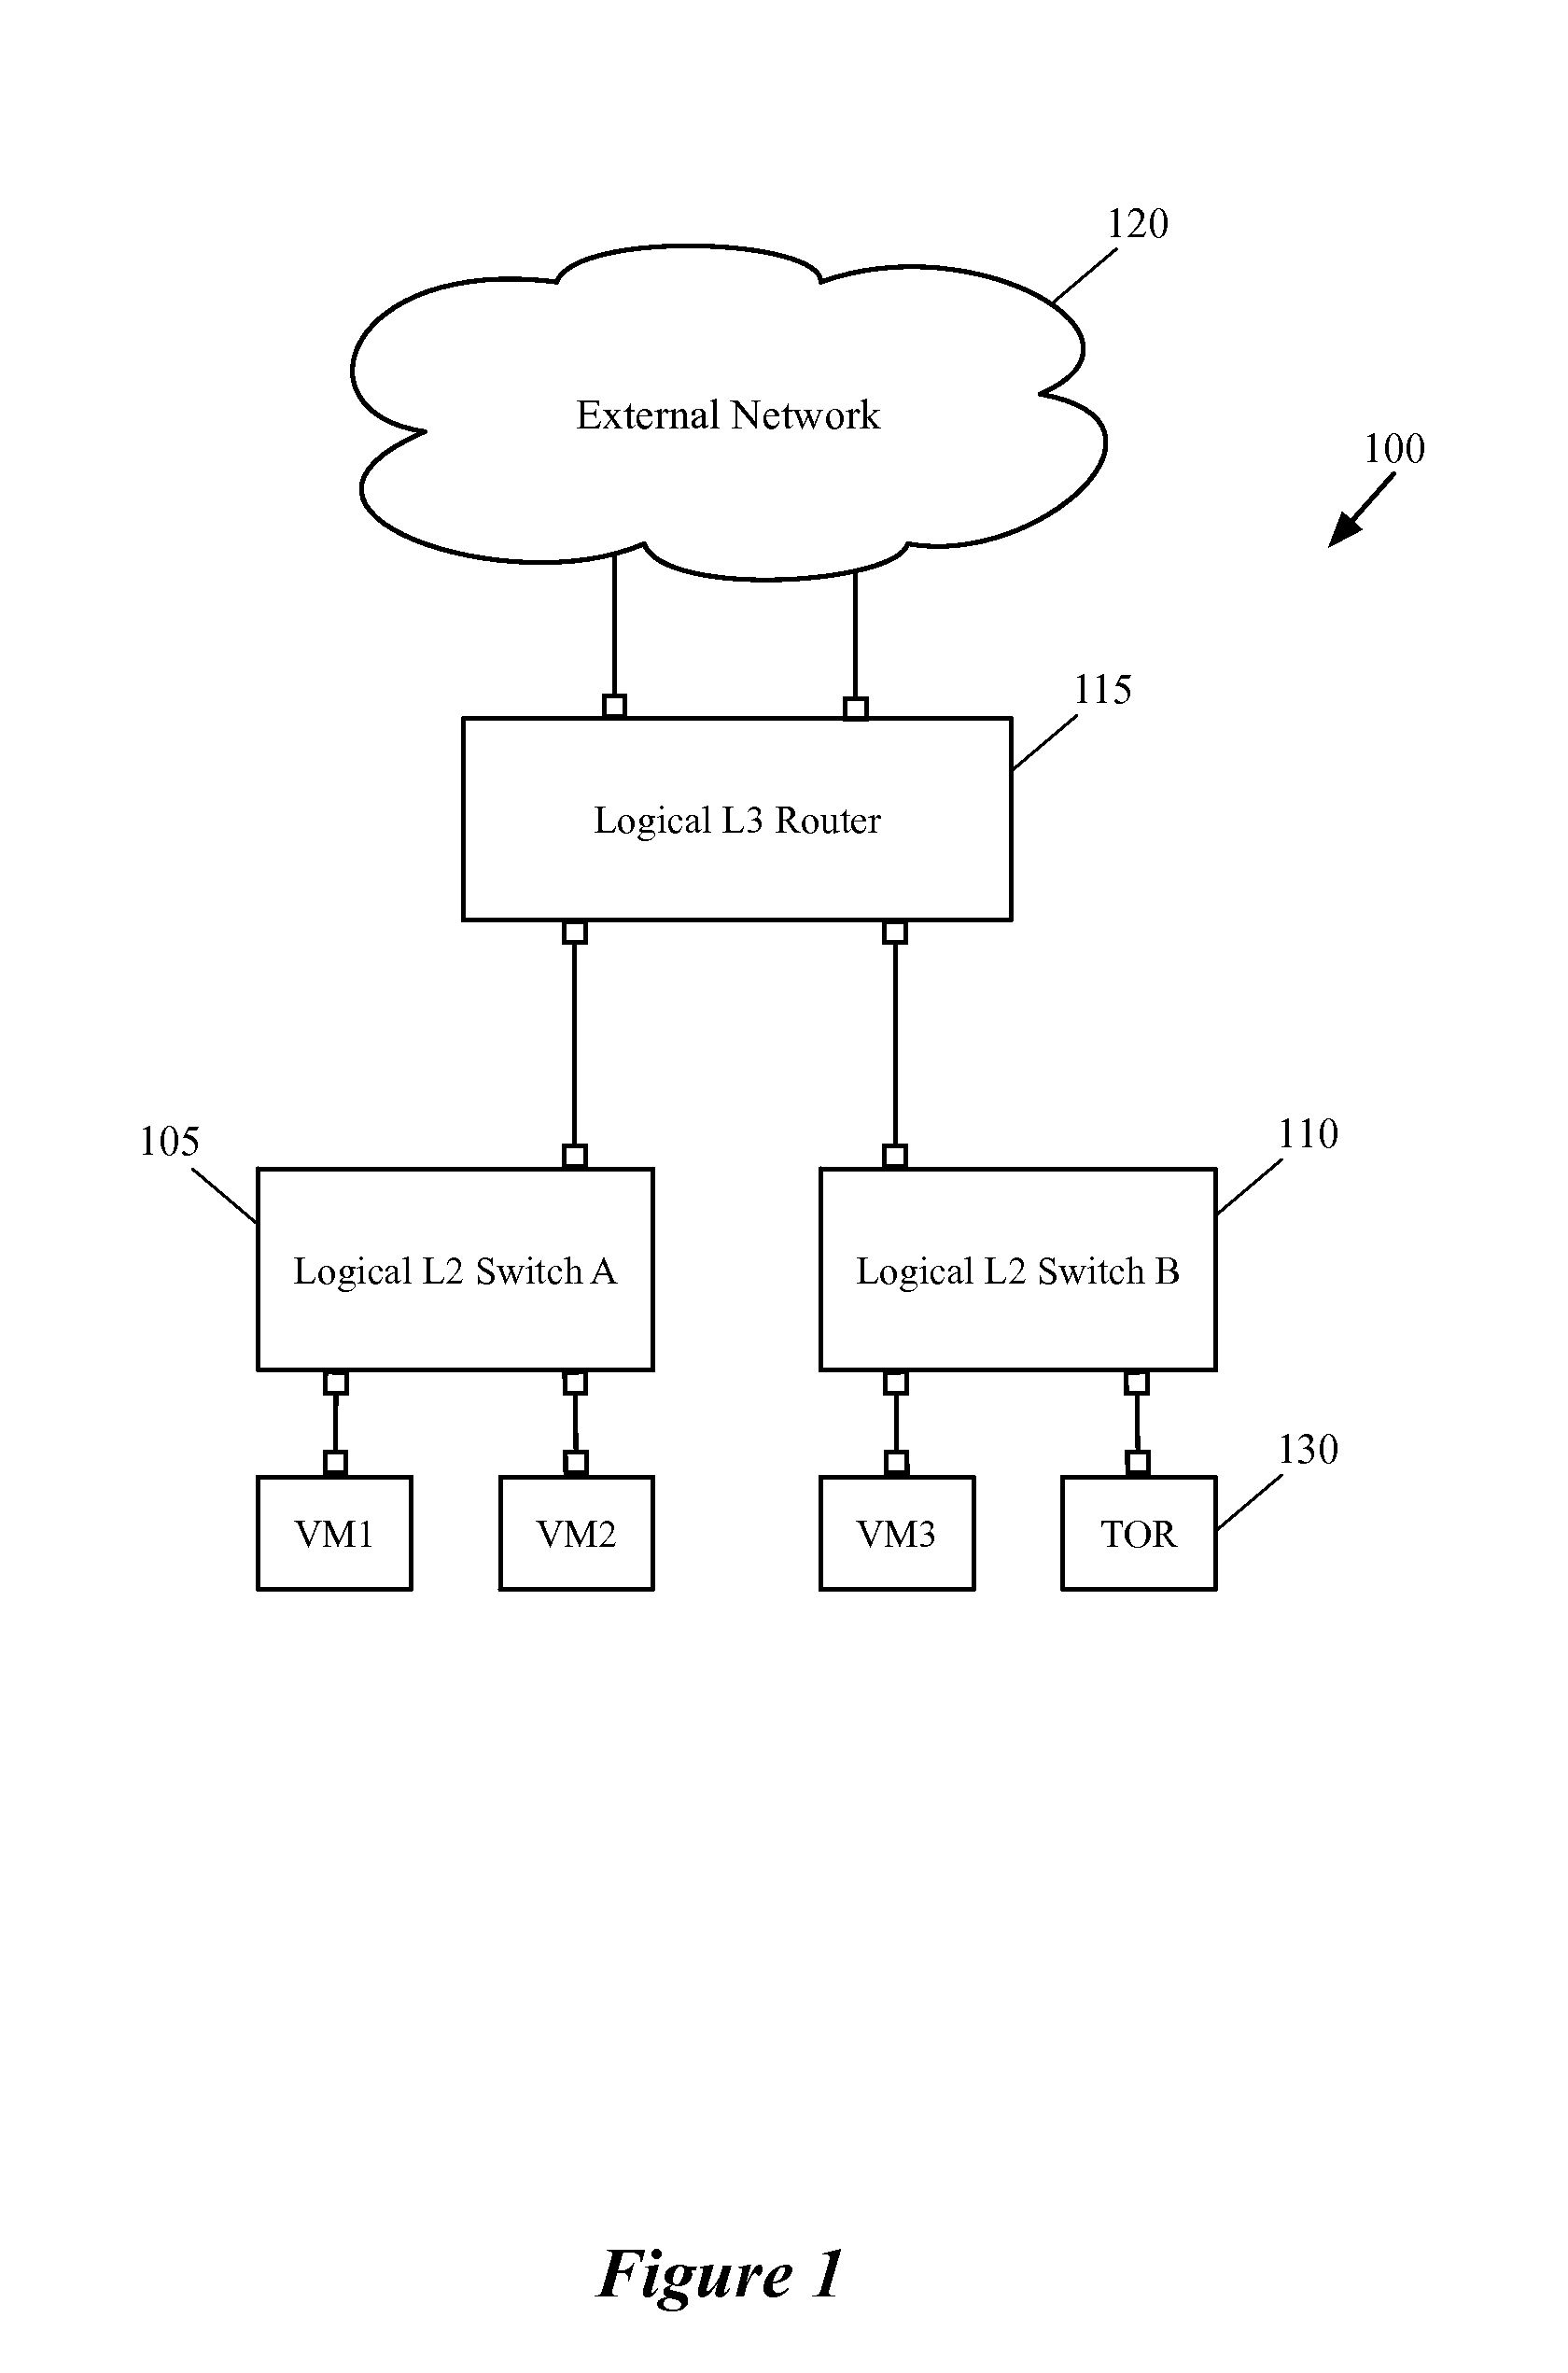 Enabling Hardware Switches to Perform Logical Routing Functionalities